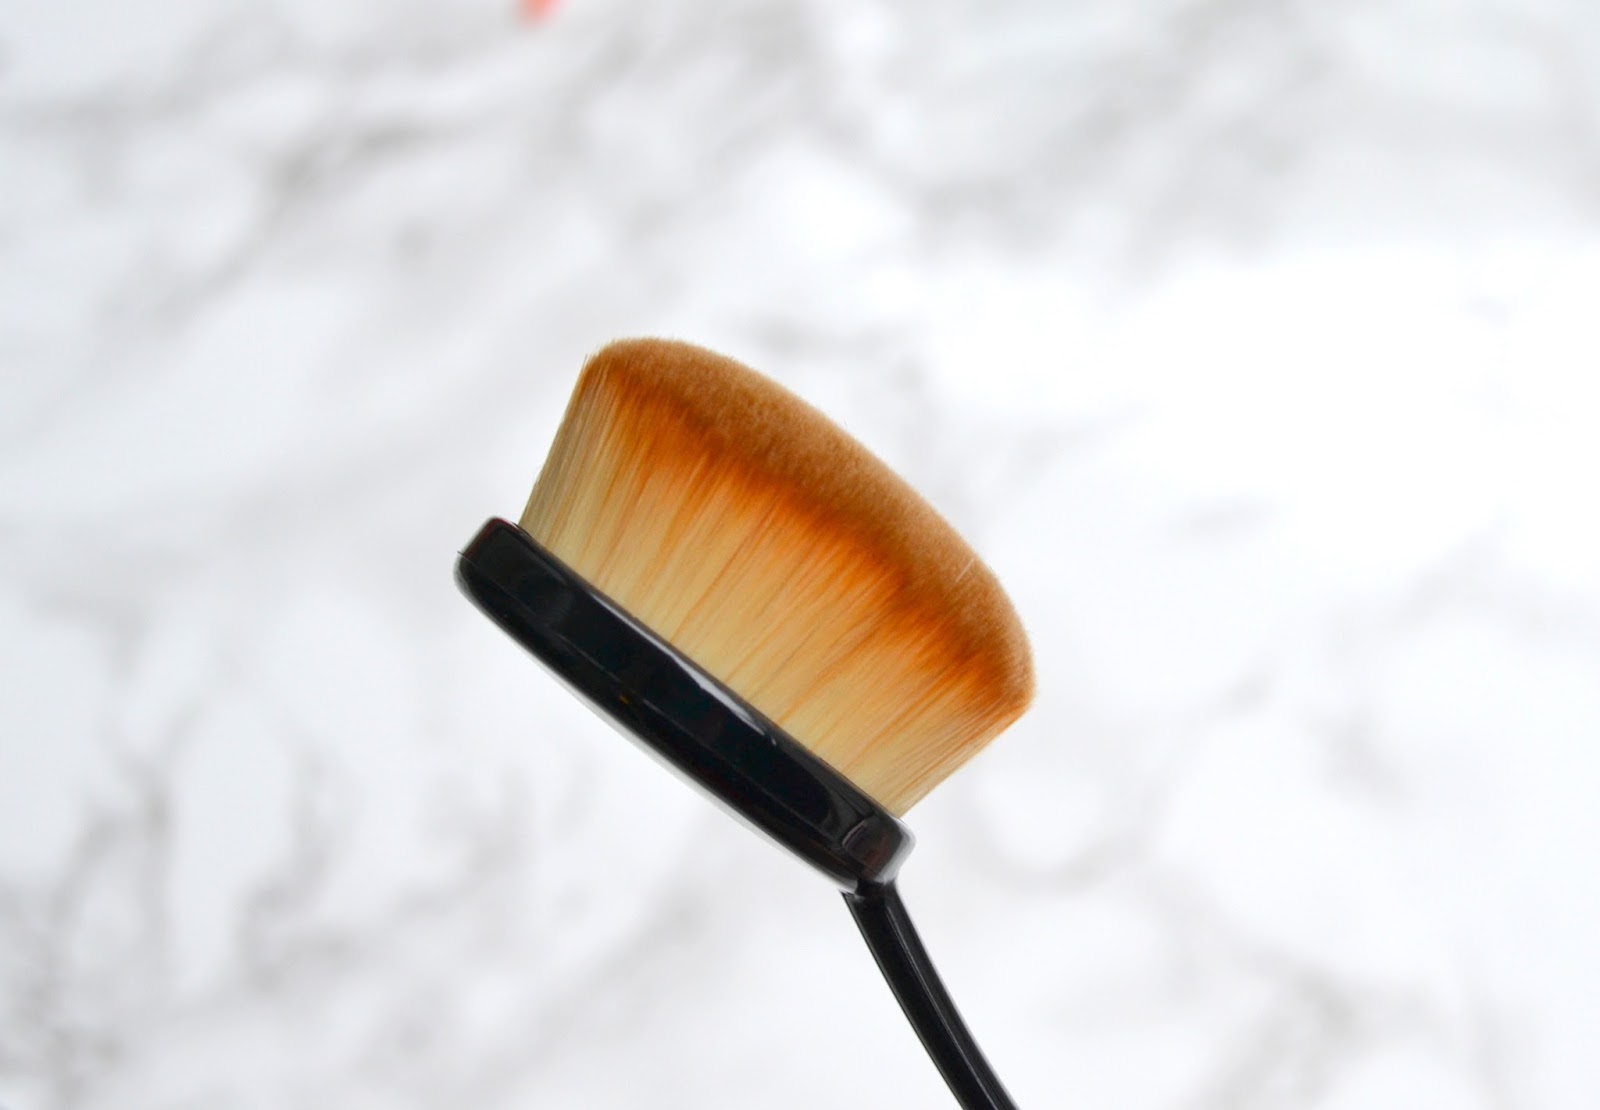 How do you use oval makeup brushes?